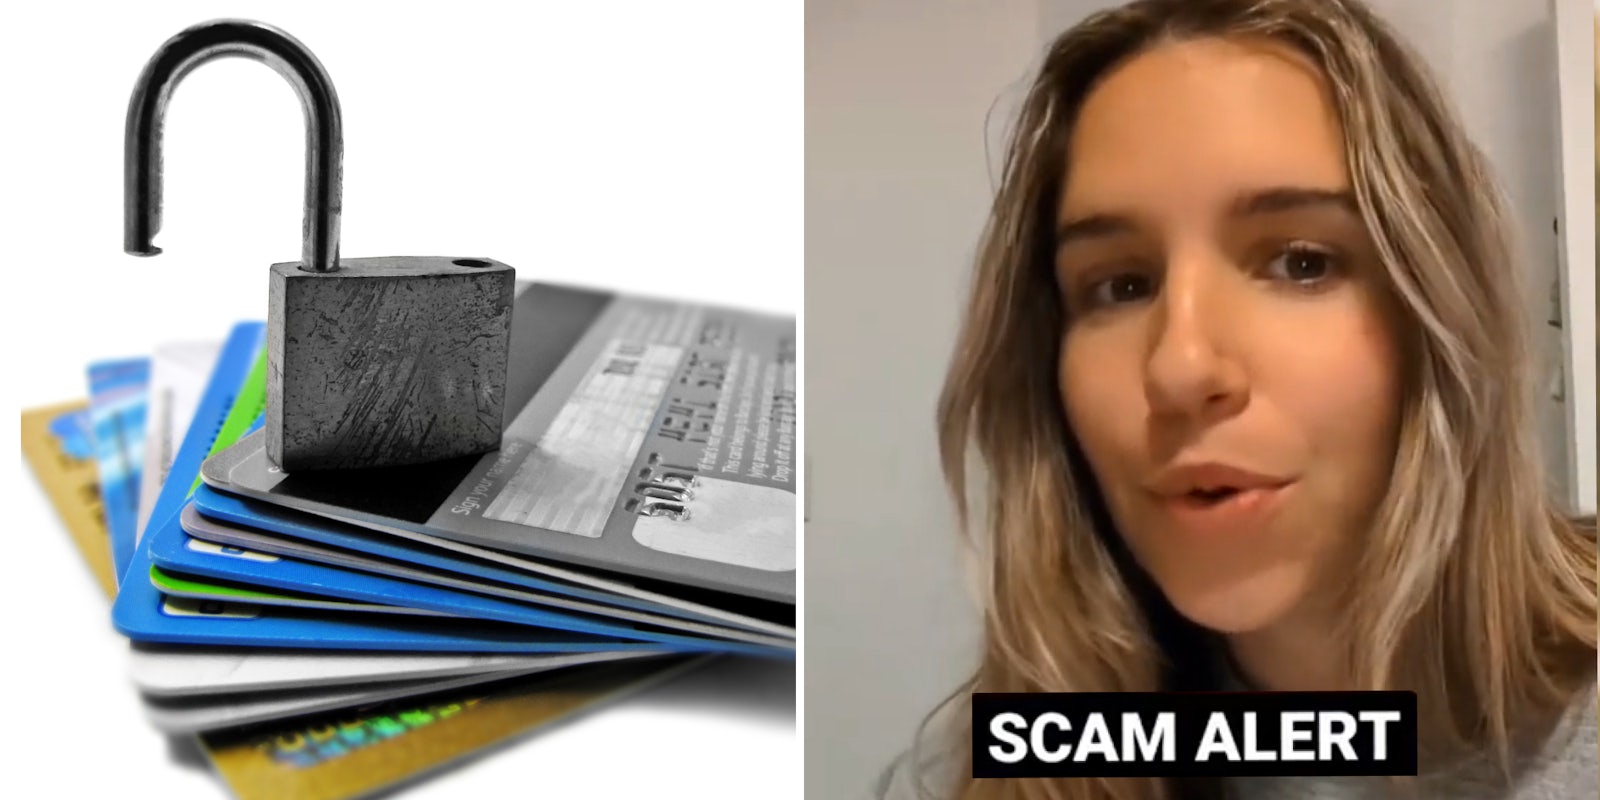 Credit cards on white background with open lock on top (l) woman talking caption 'SCAM ALERT' (r)